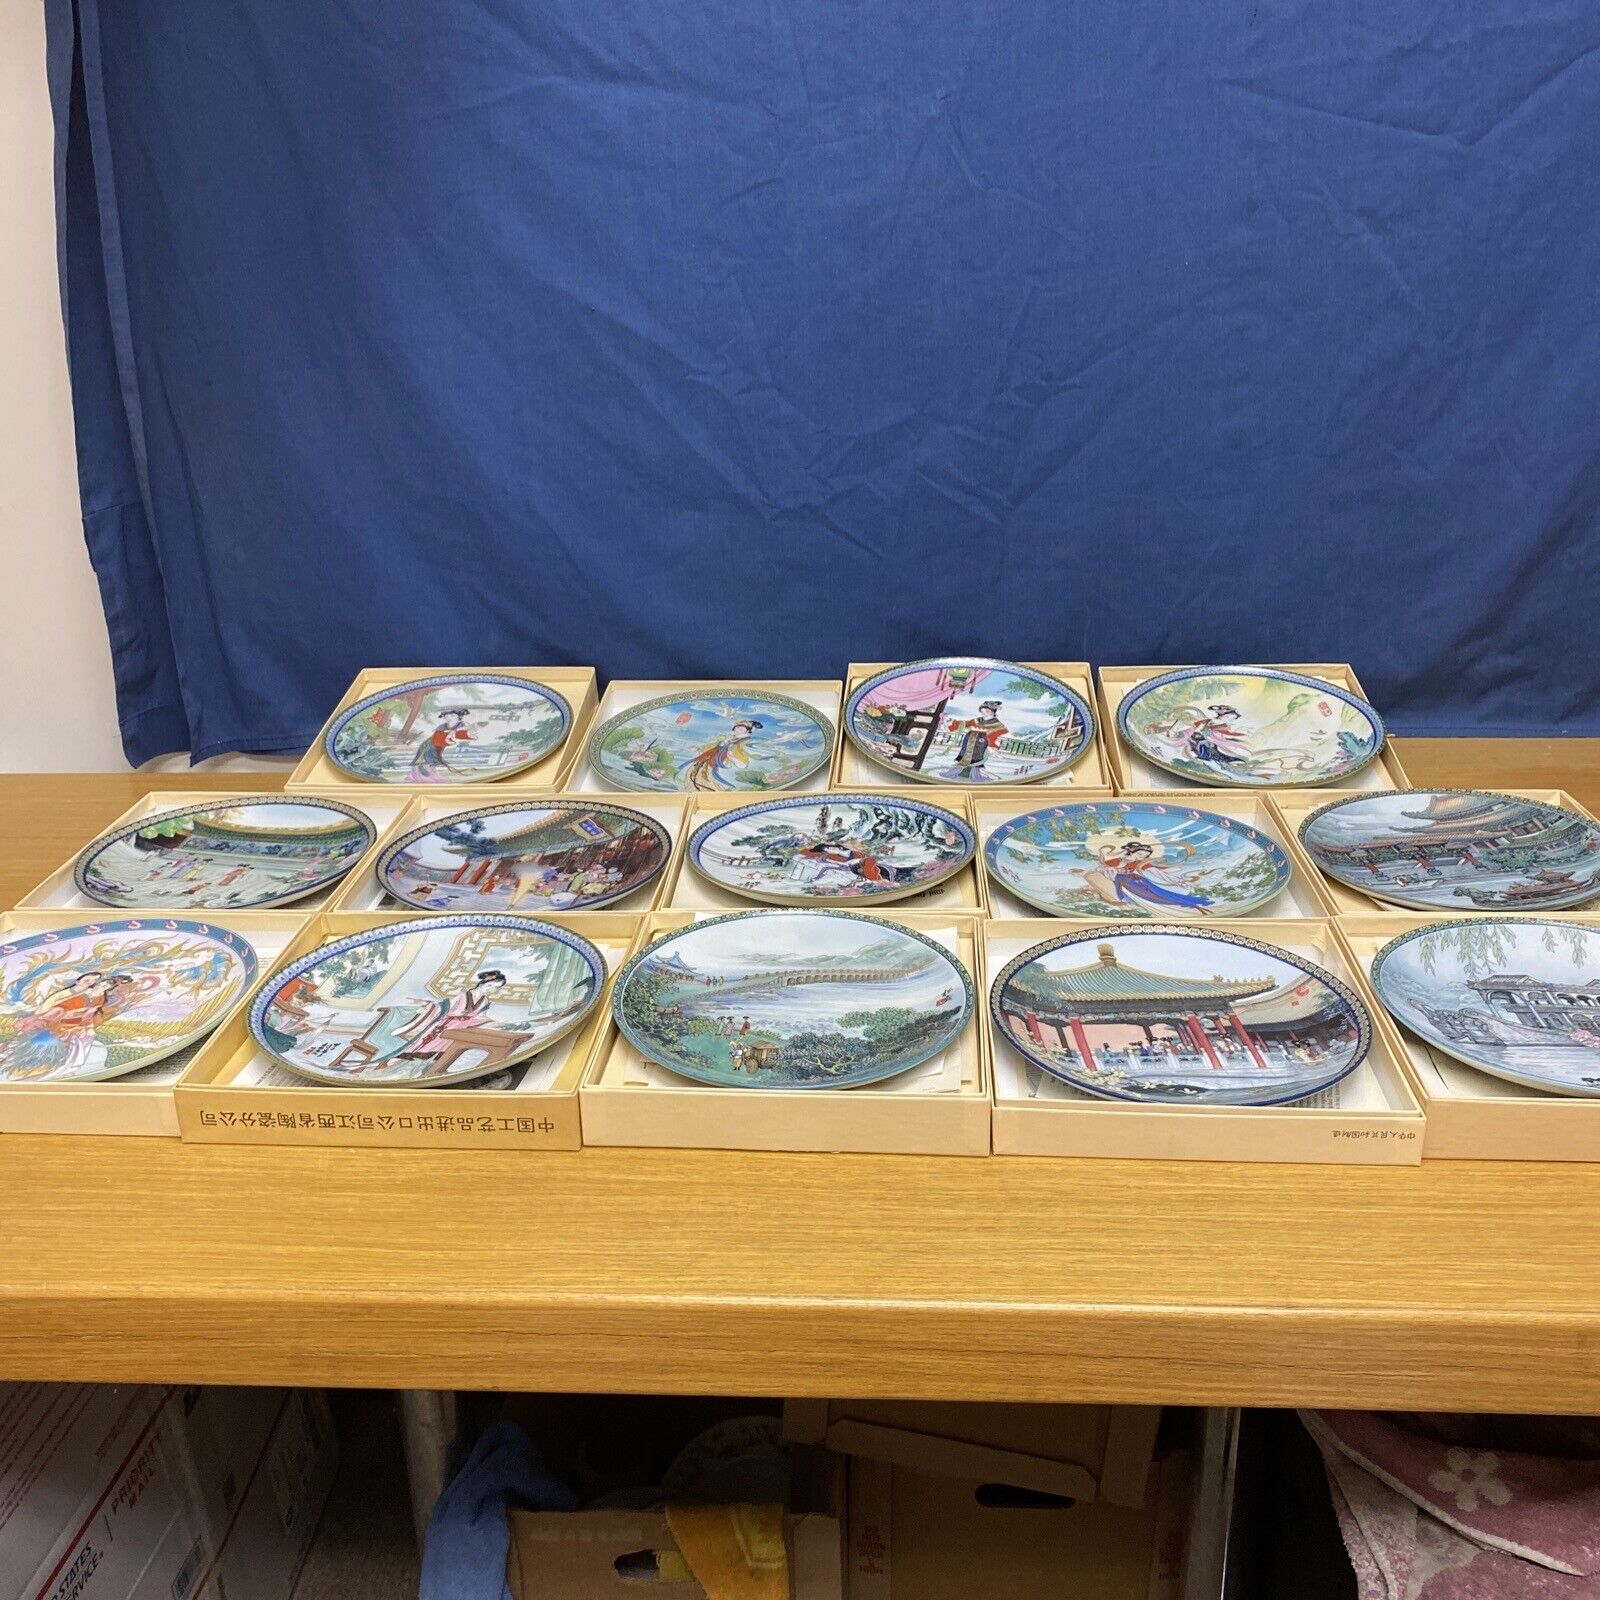 14 Beauties of the Red Mansion 1980s Imperial Jingdezhen Porcelain Plates (4427)